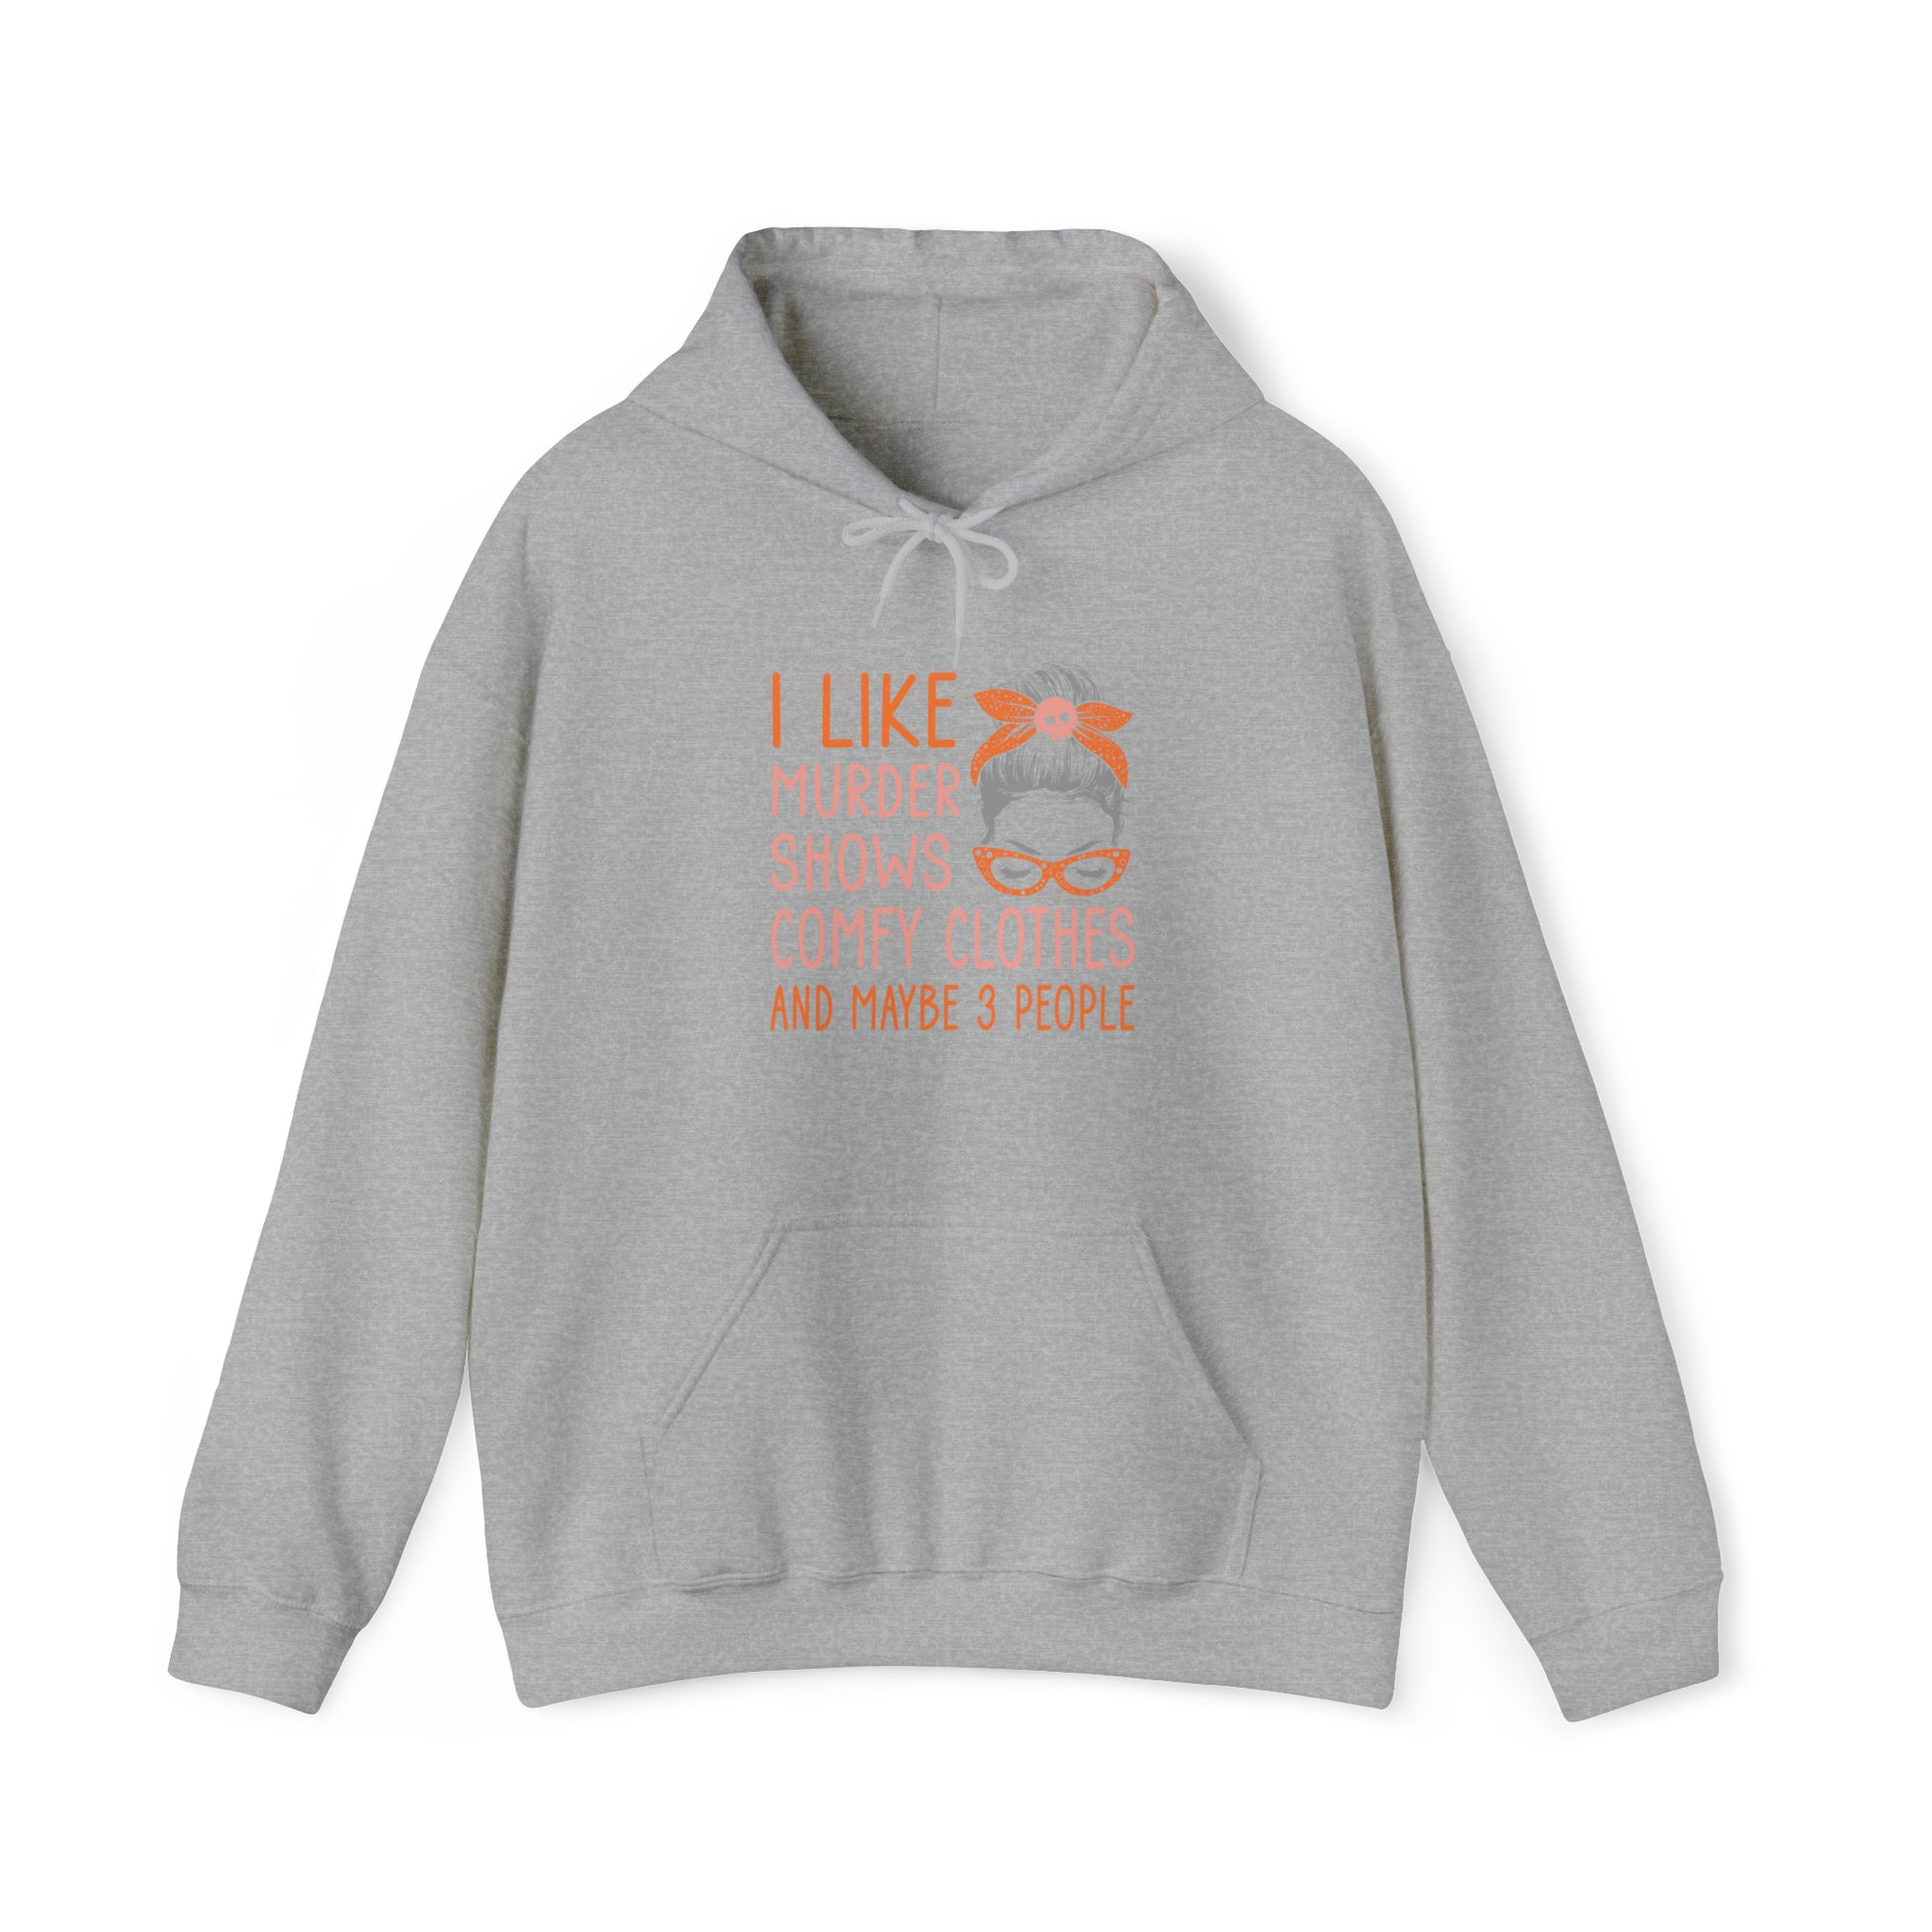 "I Like Murder Shows & Comfy Clothes" Hoodie - Weave Got Gifts - Unique Gifts You Won’t Find Anywhere Else!